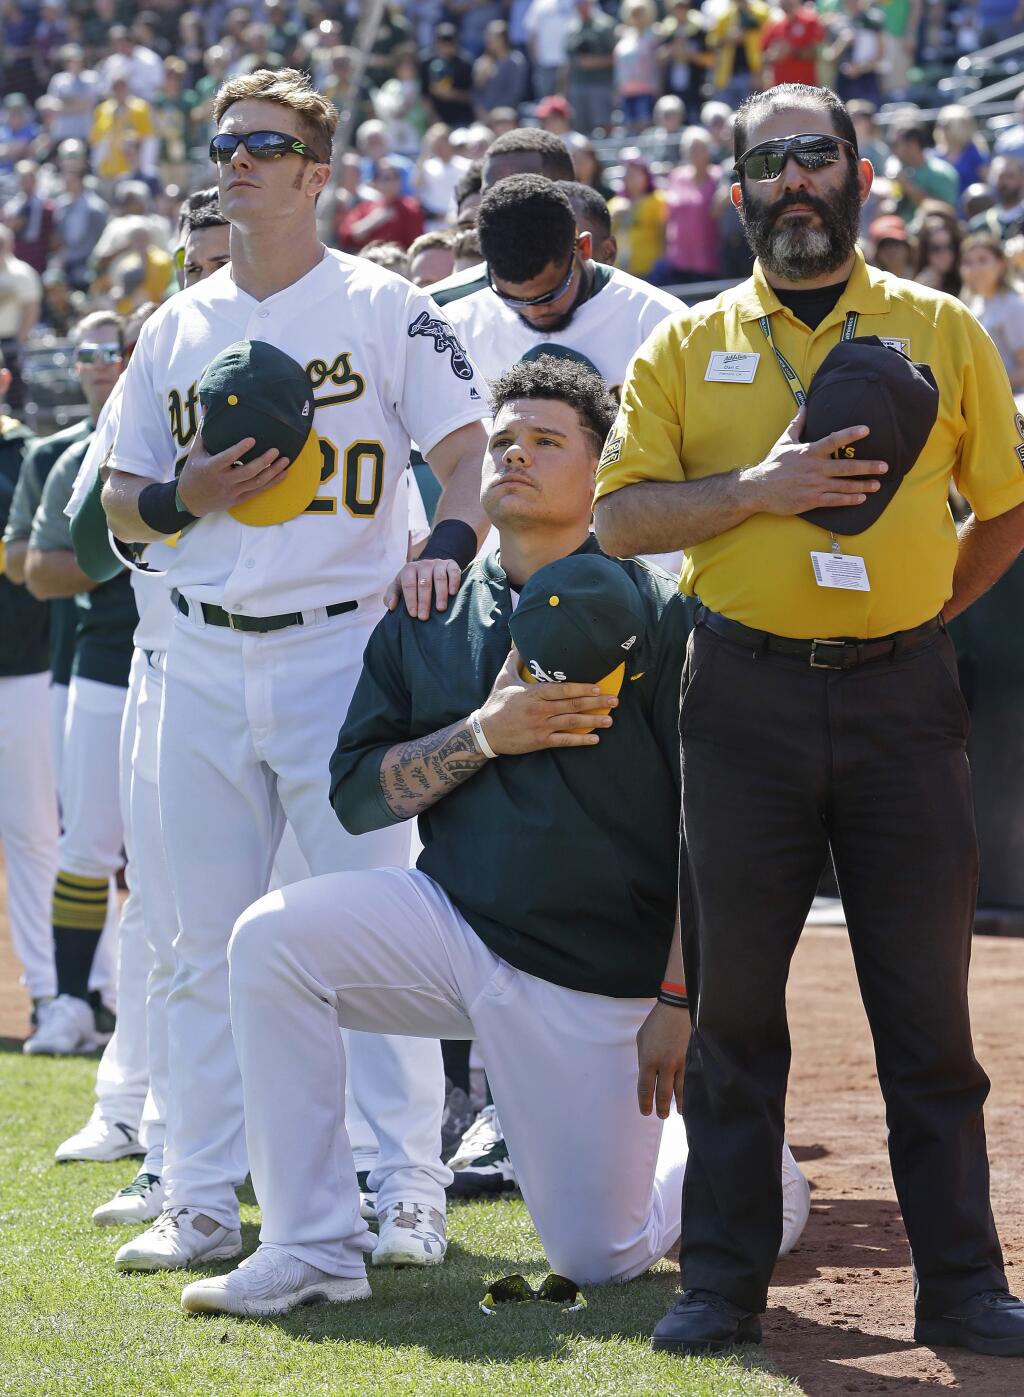 Oakland Athletics' Mark Canha (20) places his hand on the shoulder of Bruce Maxwell as Maxwell takes a knee during the national anthem prior to a baseball game against the Texas Rangers, Sunday, Sept. 24, 2017, in Oakland, Calif. (AP Photo/Ben Margot)